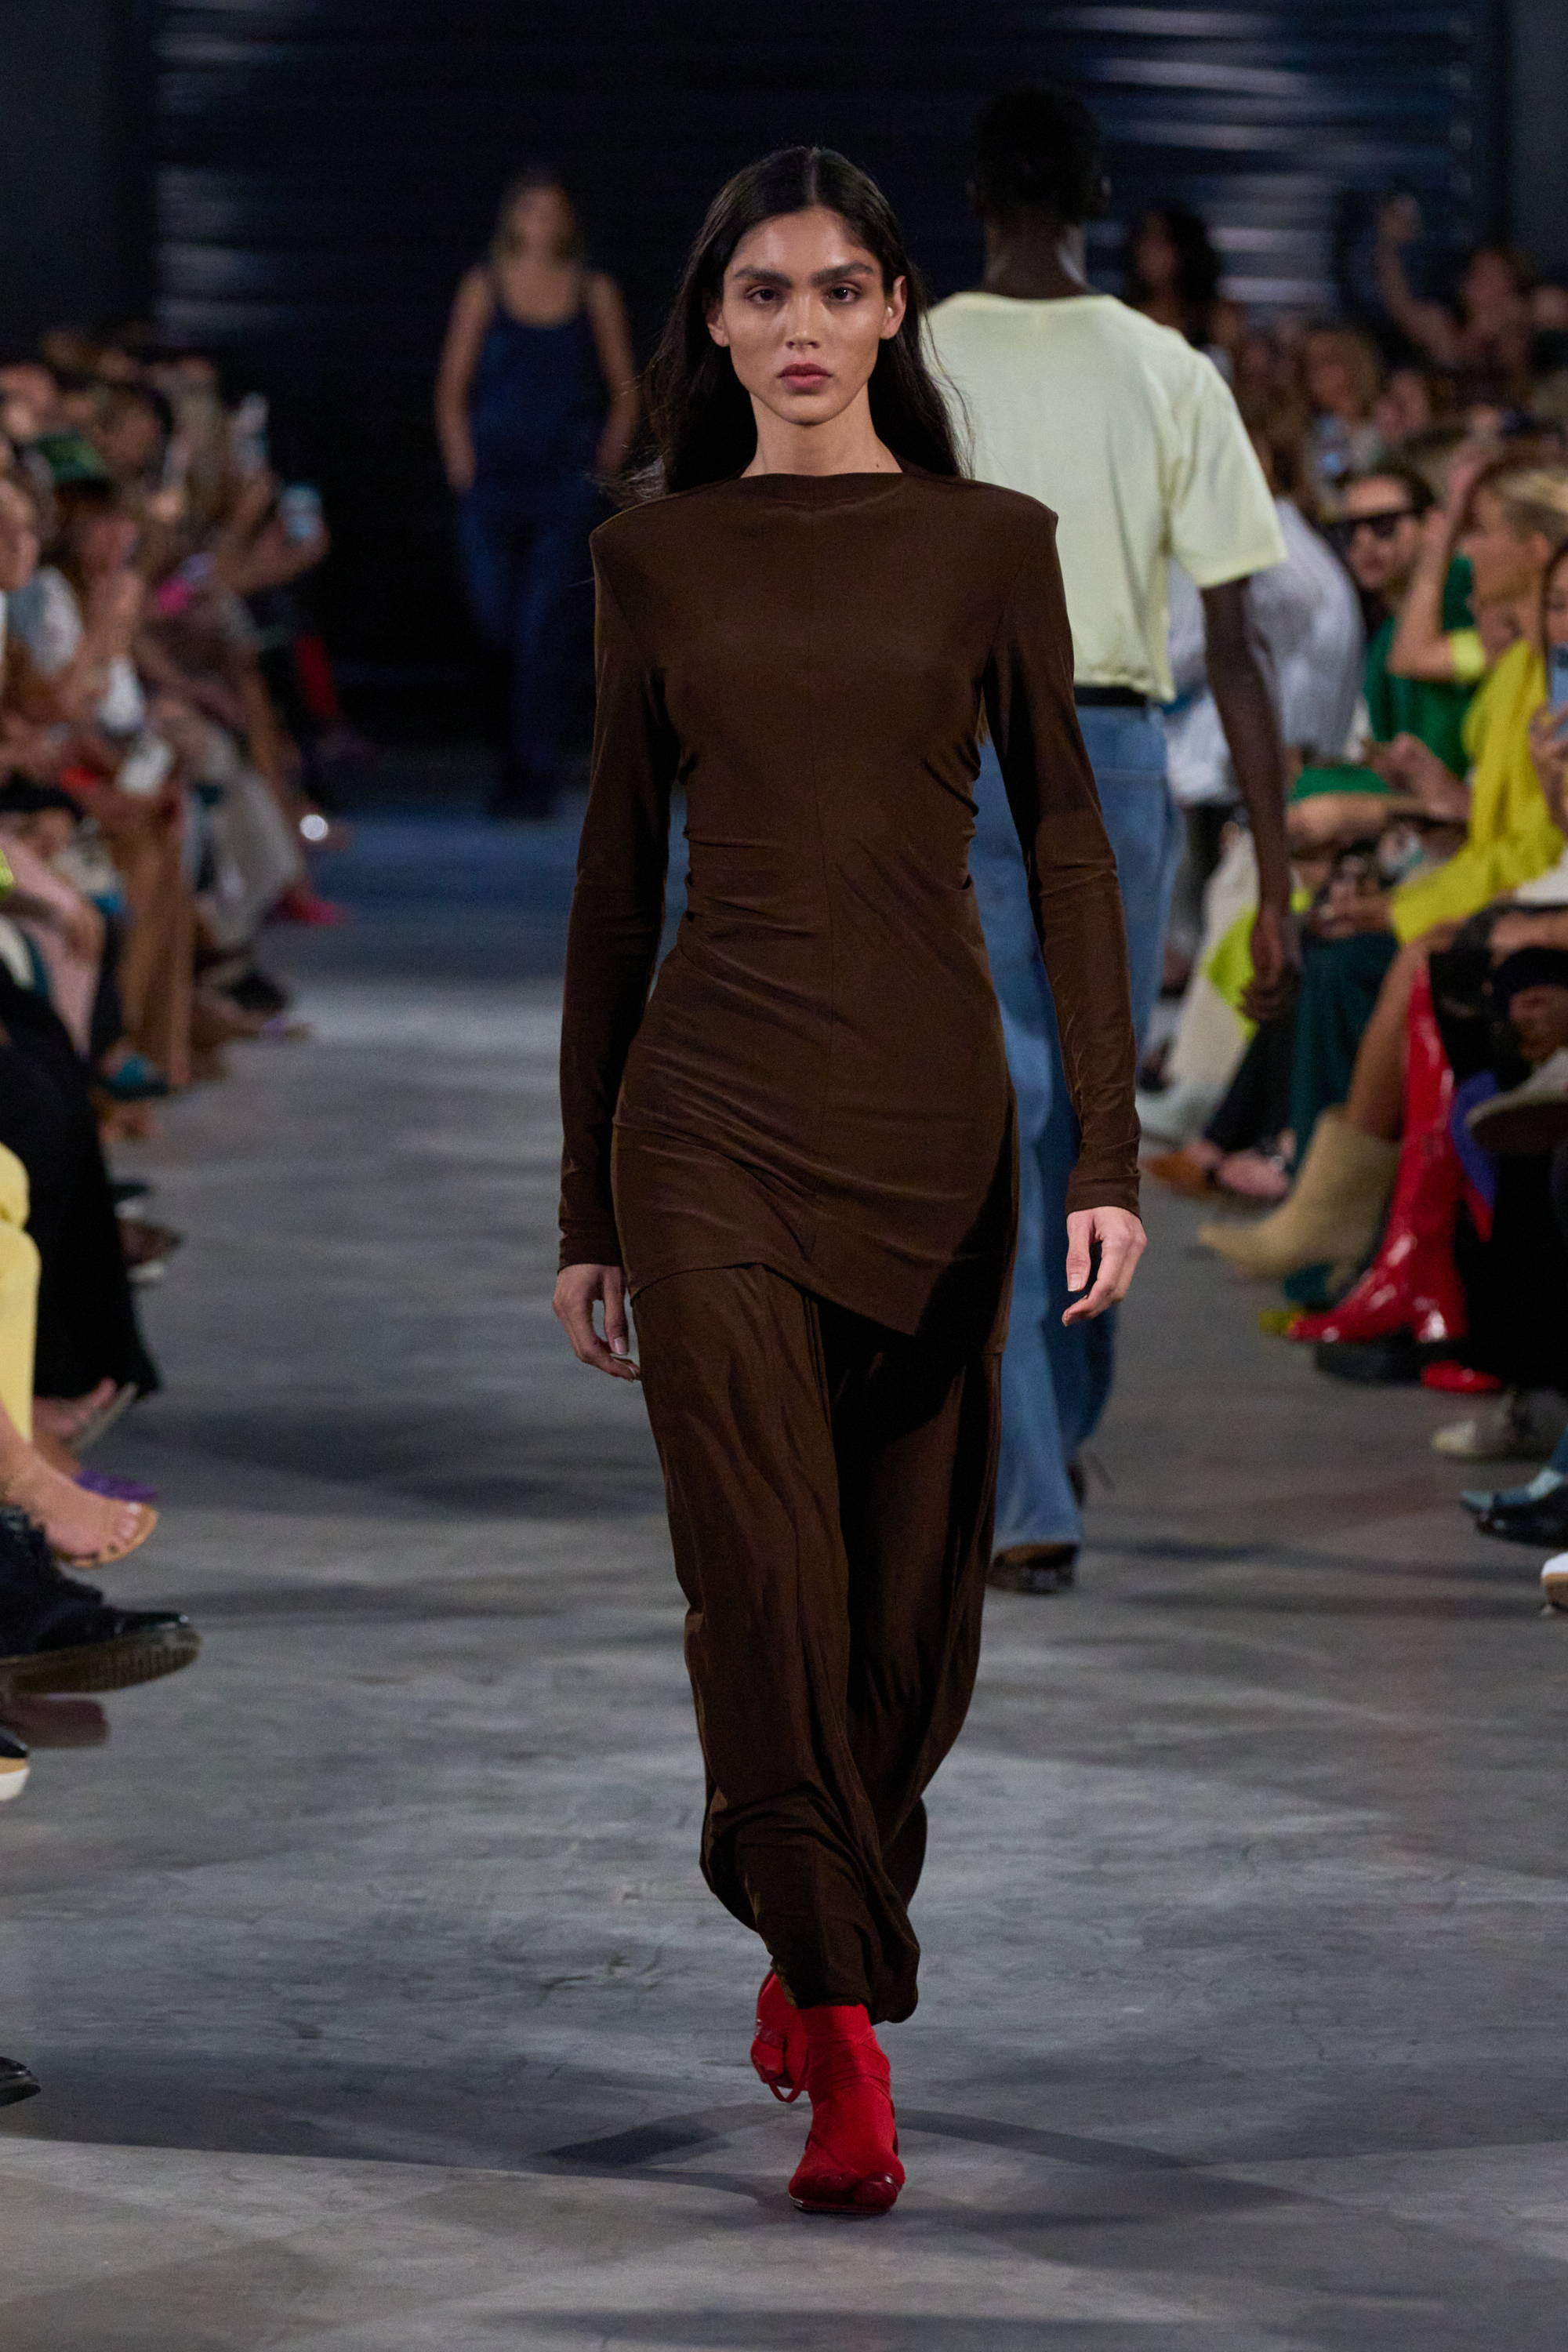 Model on a runway wearing tunic and maxi skirt